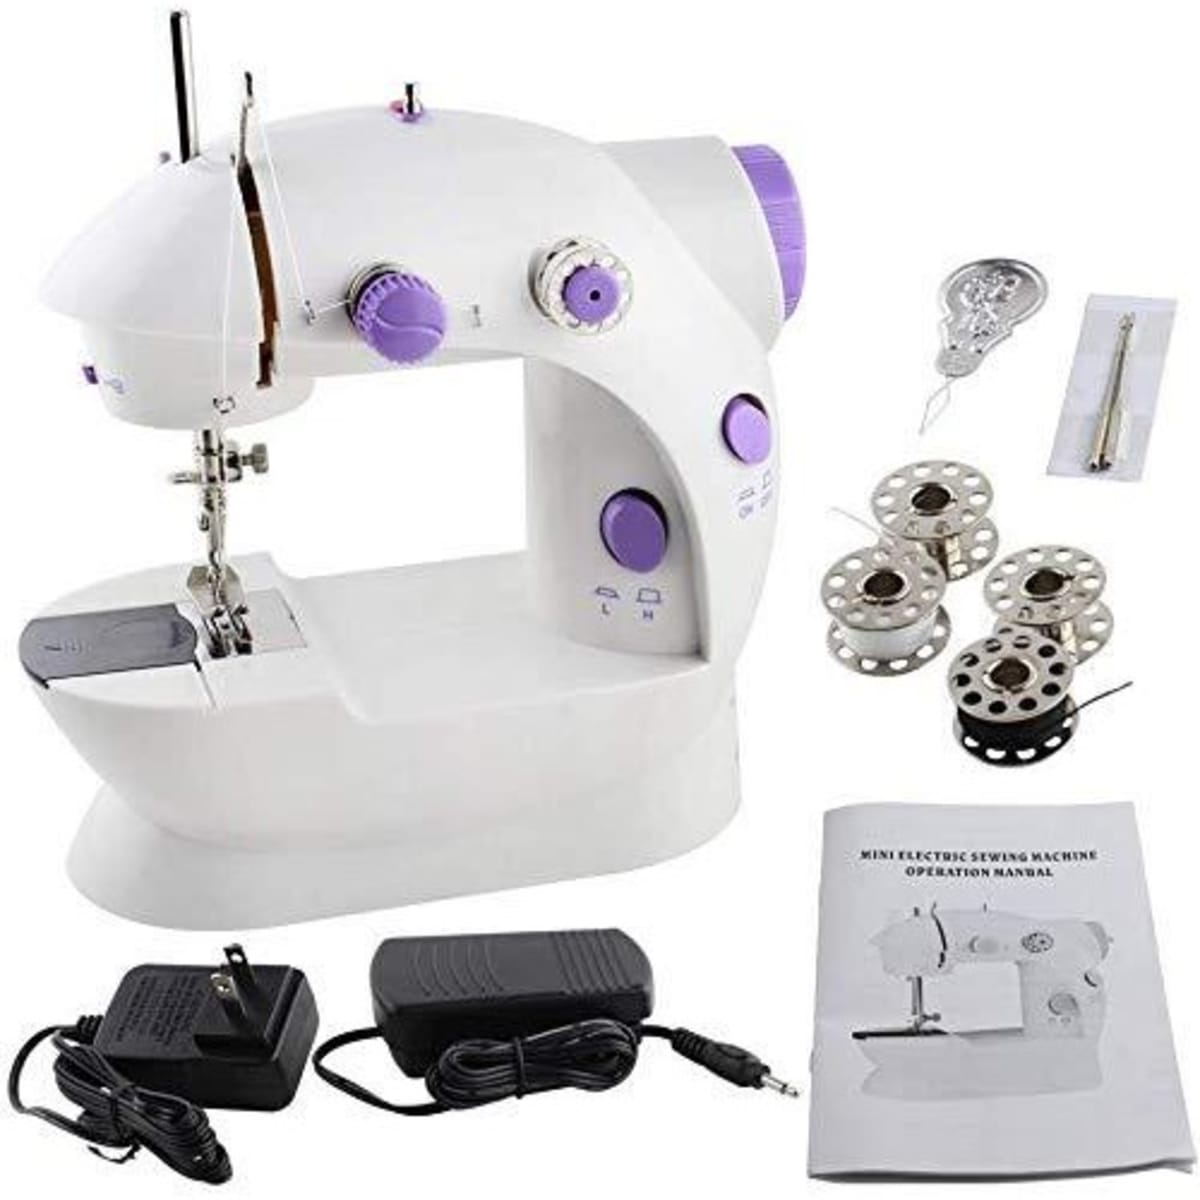 Electric sowing machine direct from - Sewing Machines & Sergers - Port  Harcourt